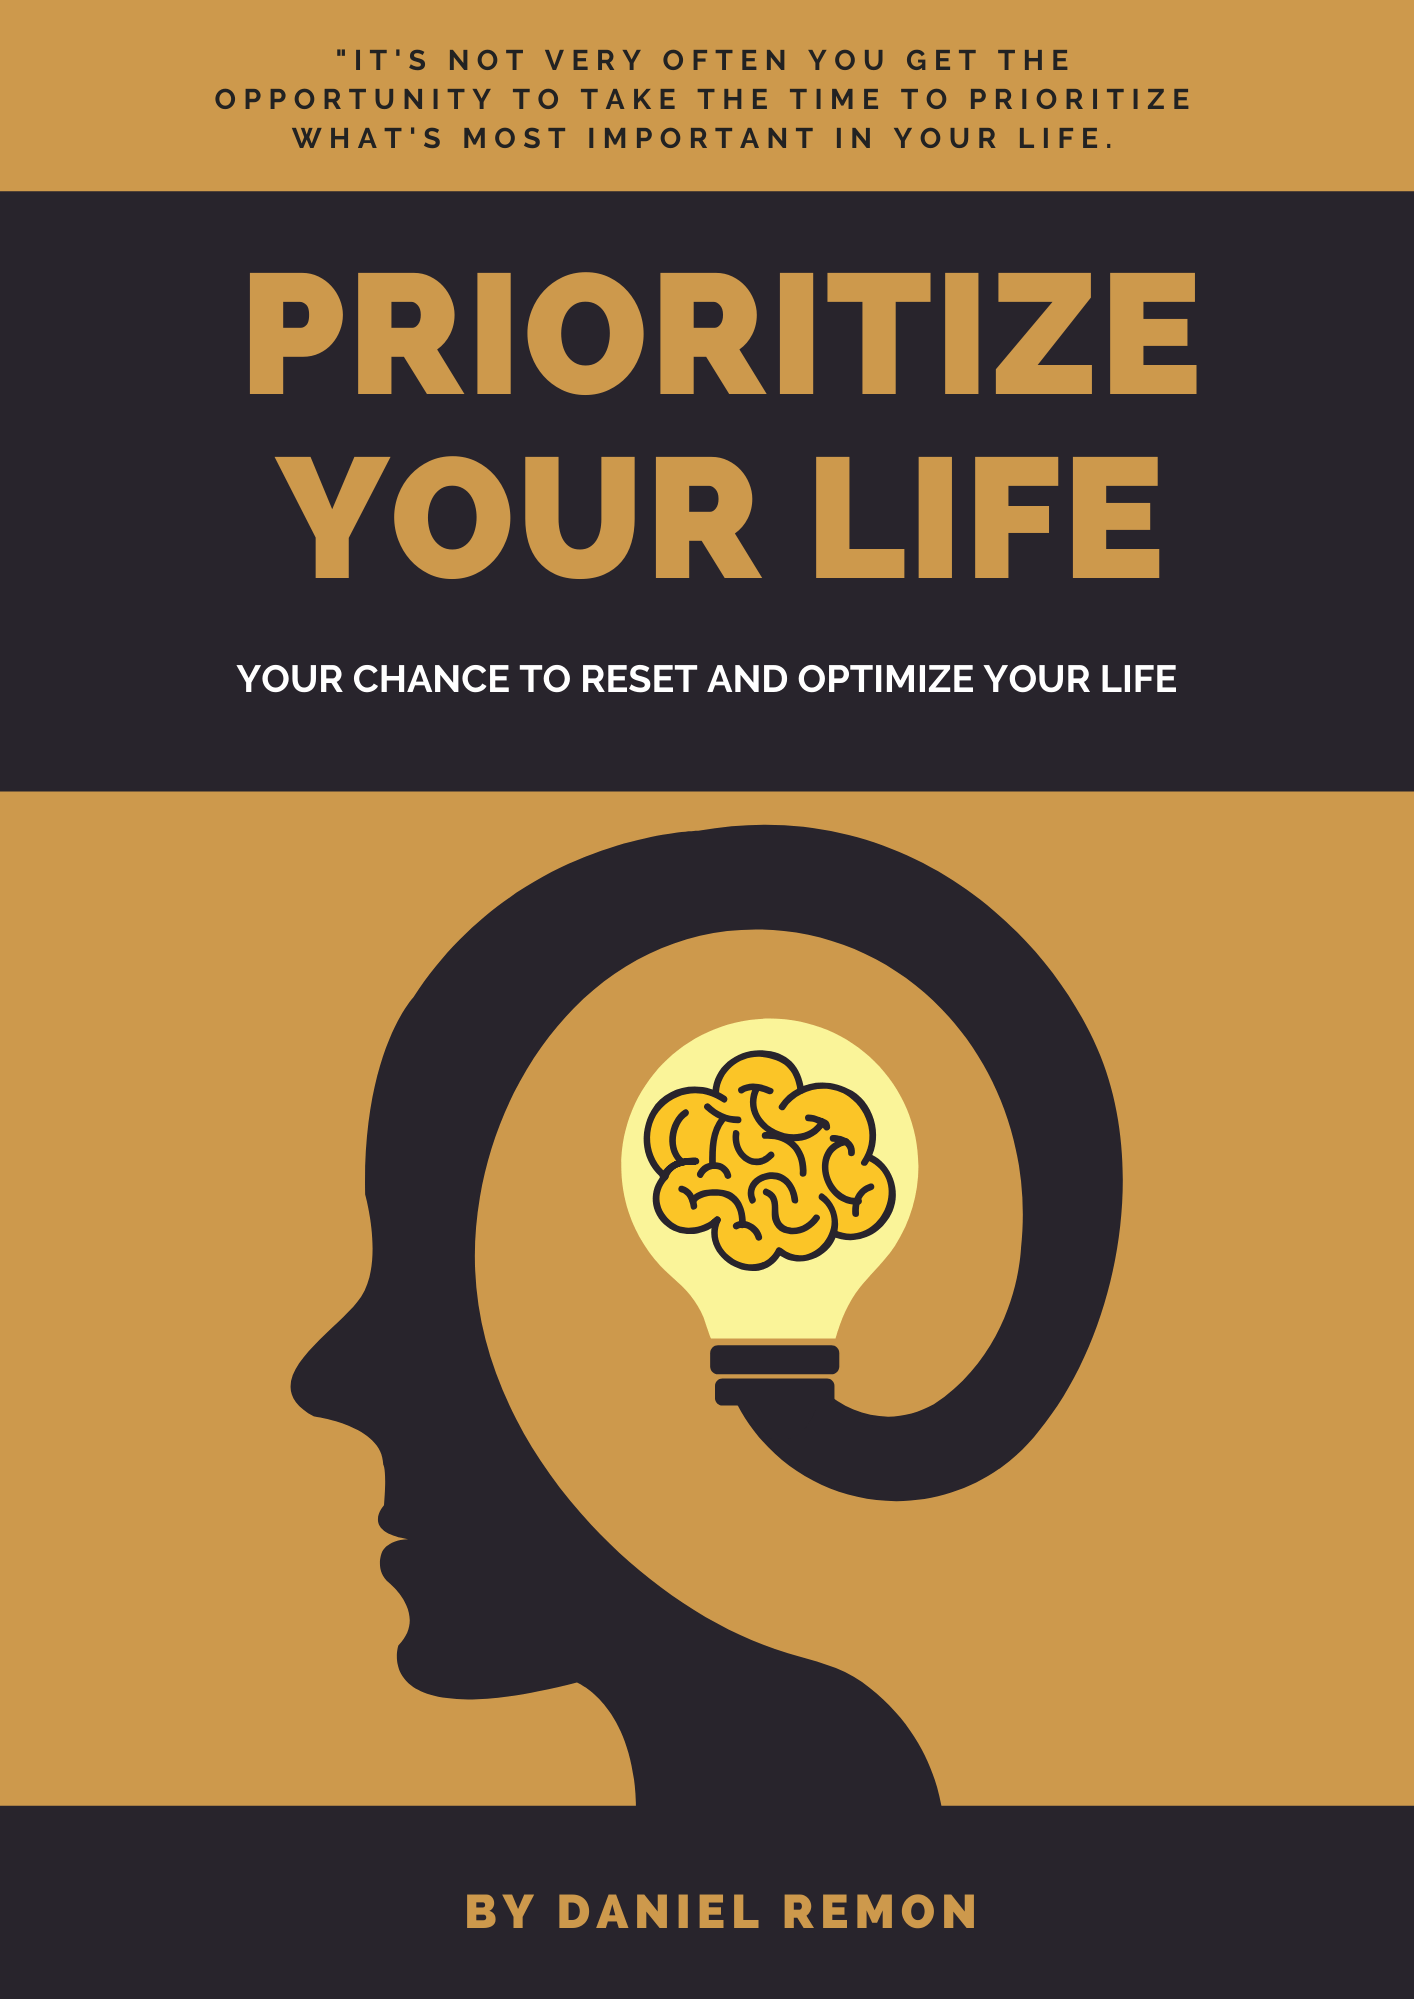 Prioritize Your Life - Dan Remon High Performance Life Coach